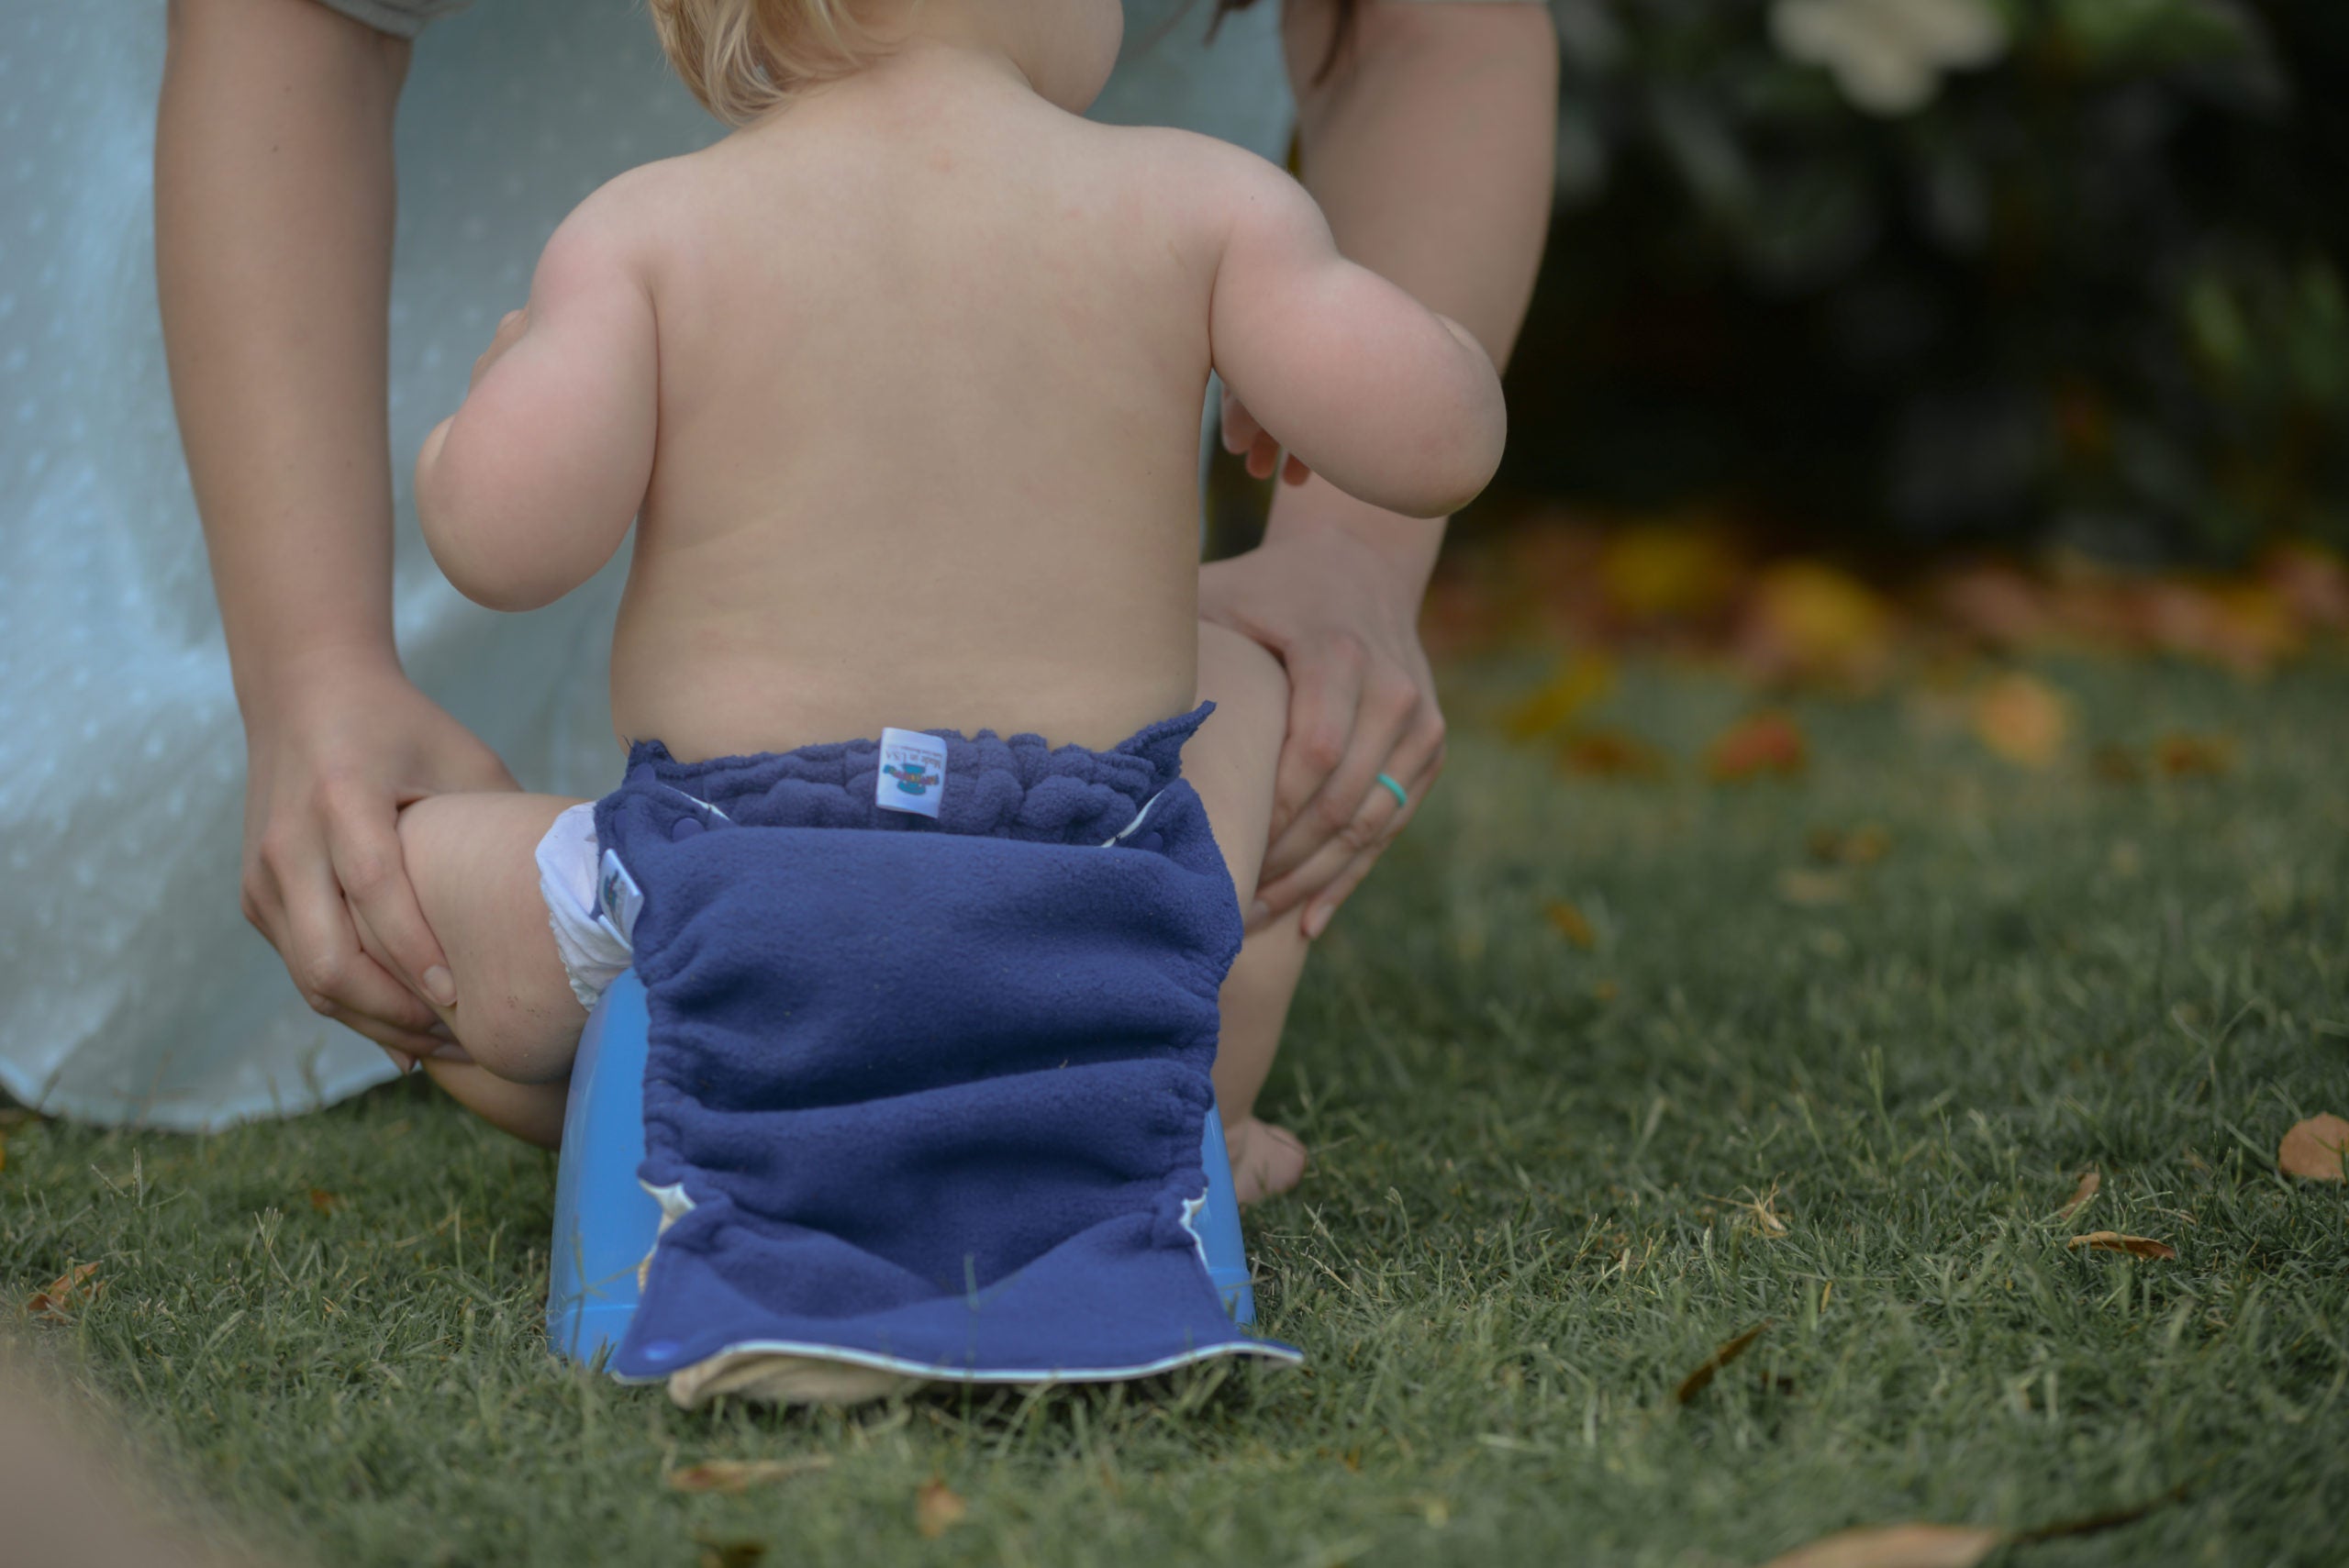 A baby uses the potty wearing a flappy-nappy diaper